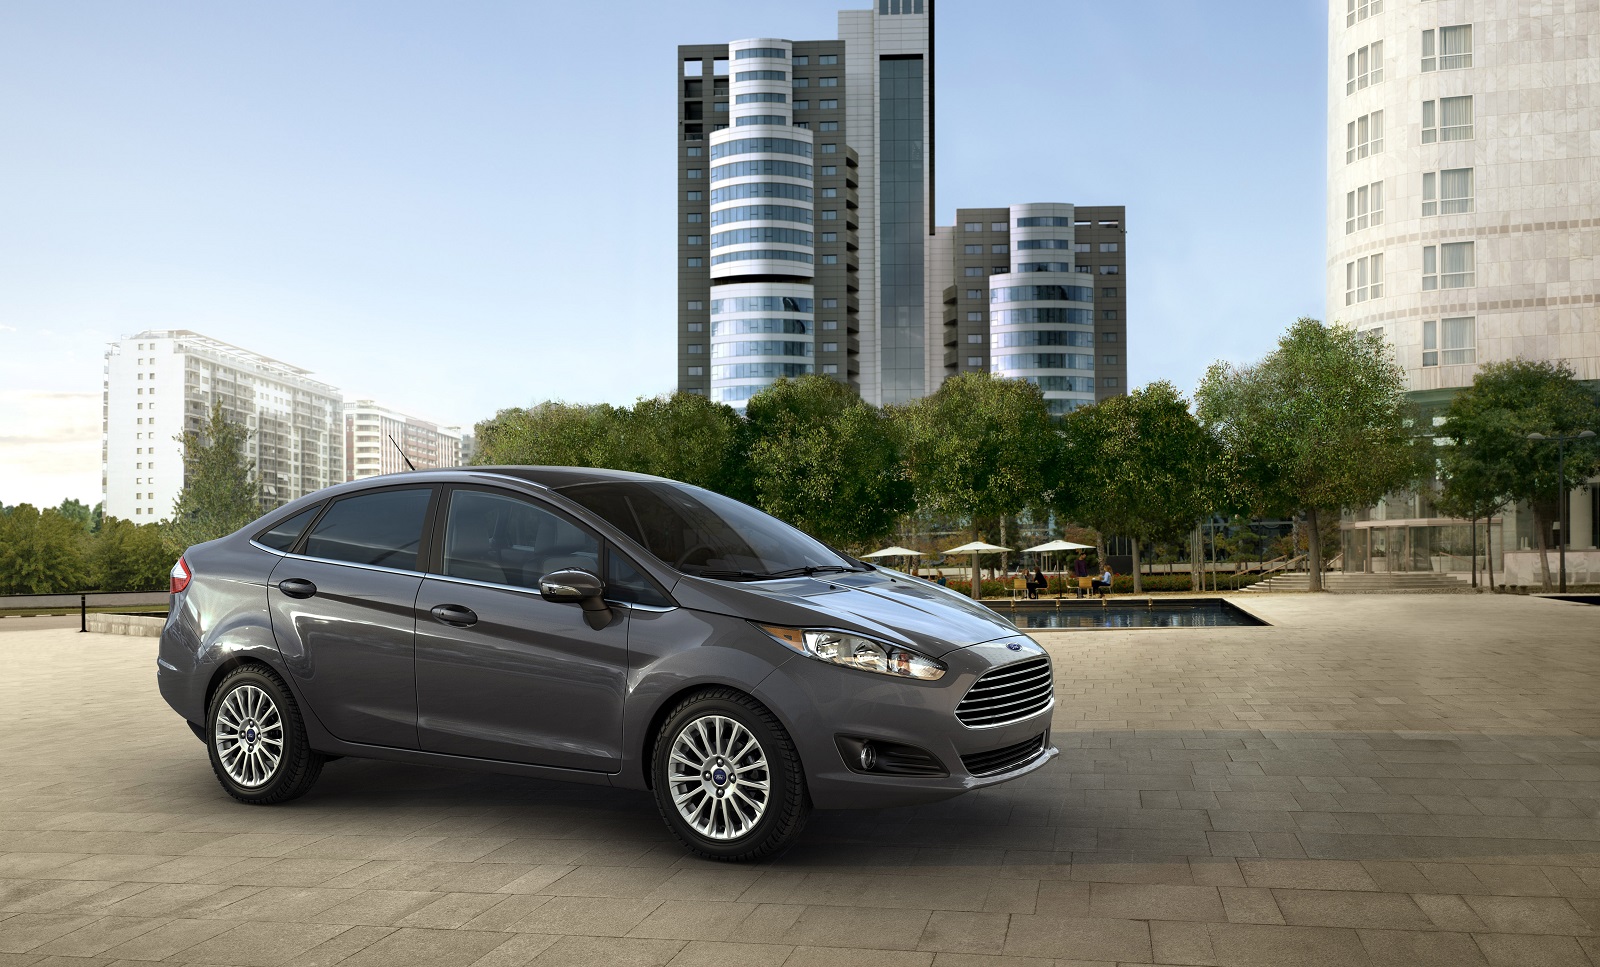 2016 Ford Fiesta Review, Ratings, Specs, Prices, Photos - The Car Connection